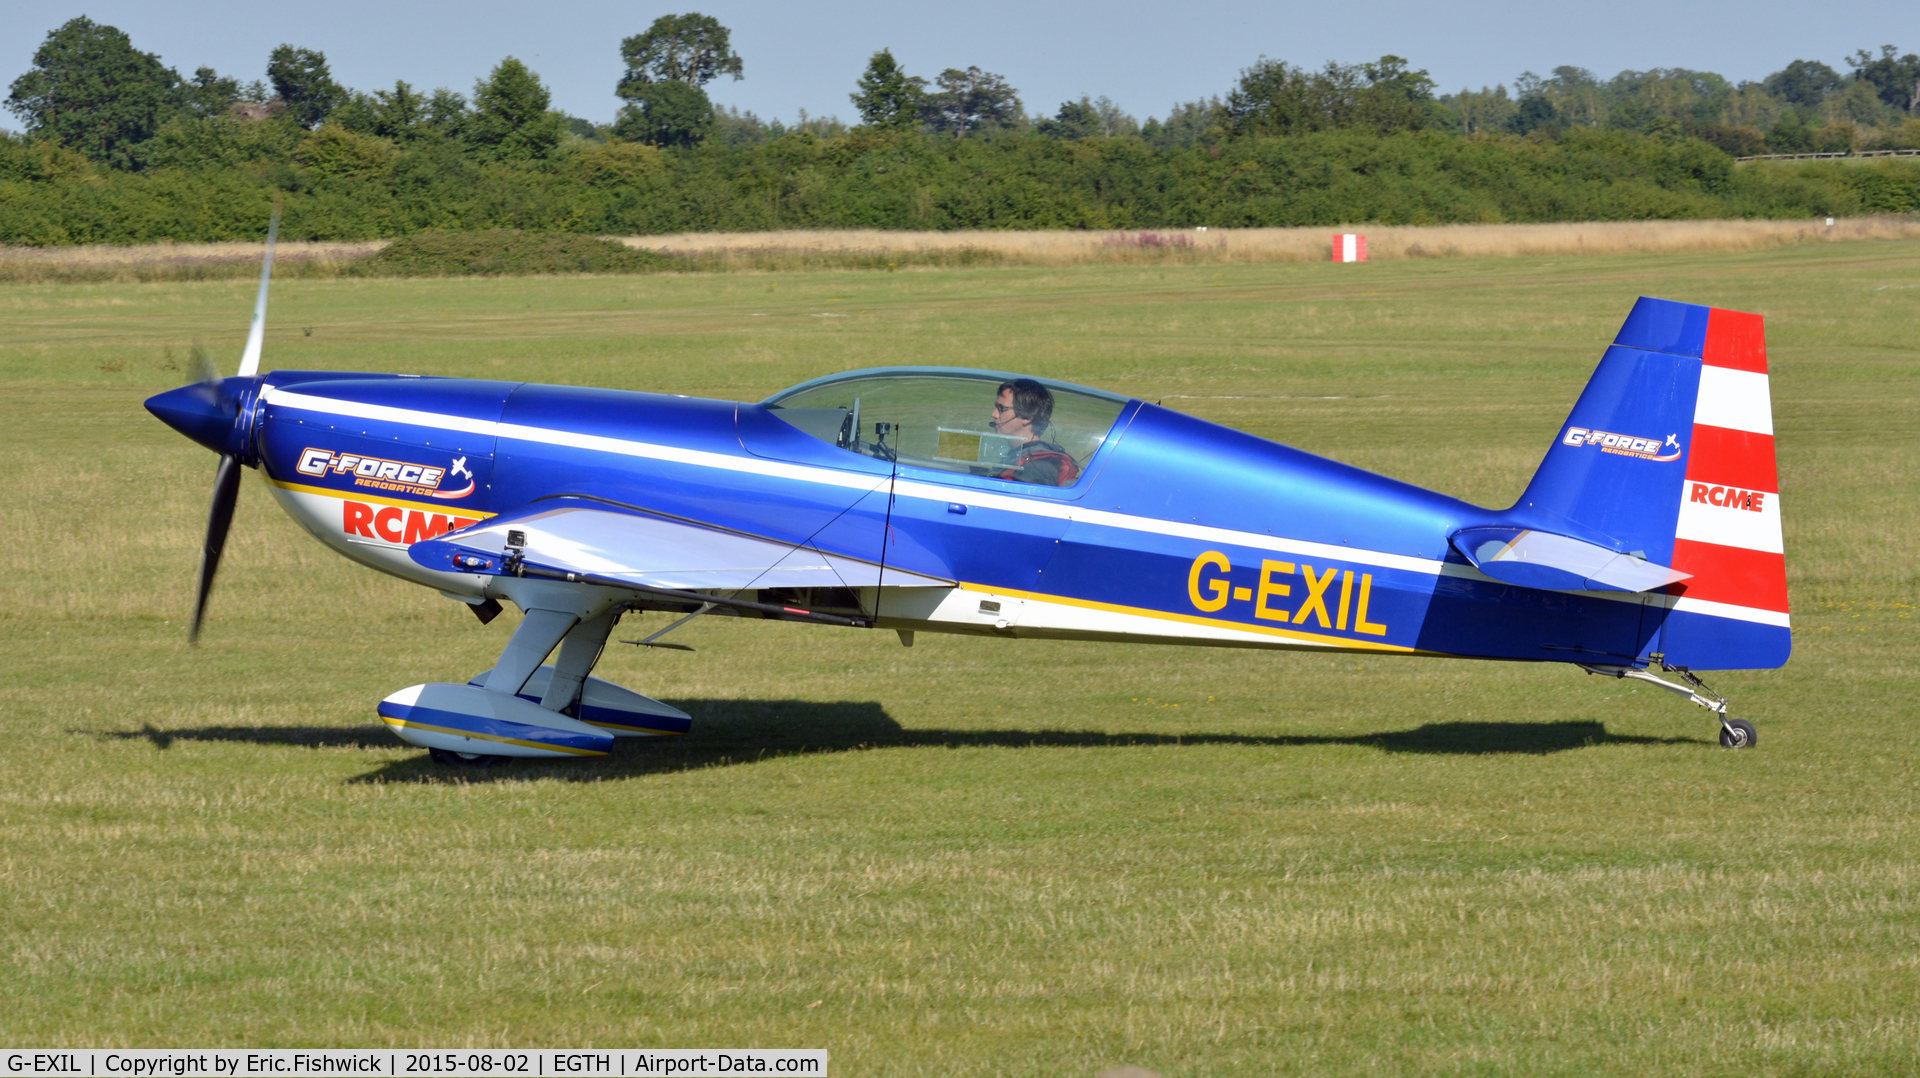 G-EXIL, 2010 Extra EA-300S C/N 1036, 1. G-EXIL at The Shuttleworth Wings and Wheels Airshow, Aug. 2015.